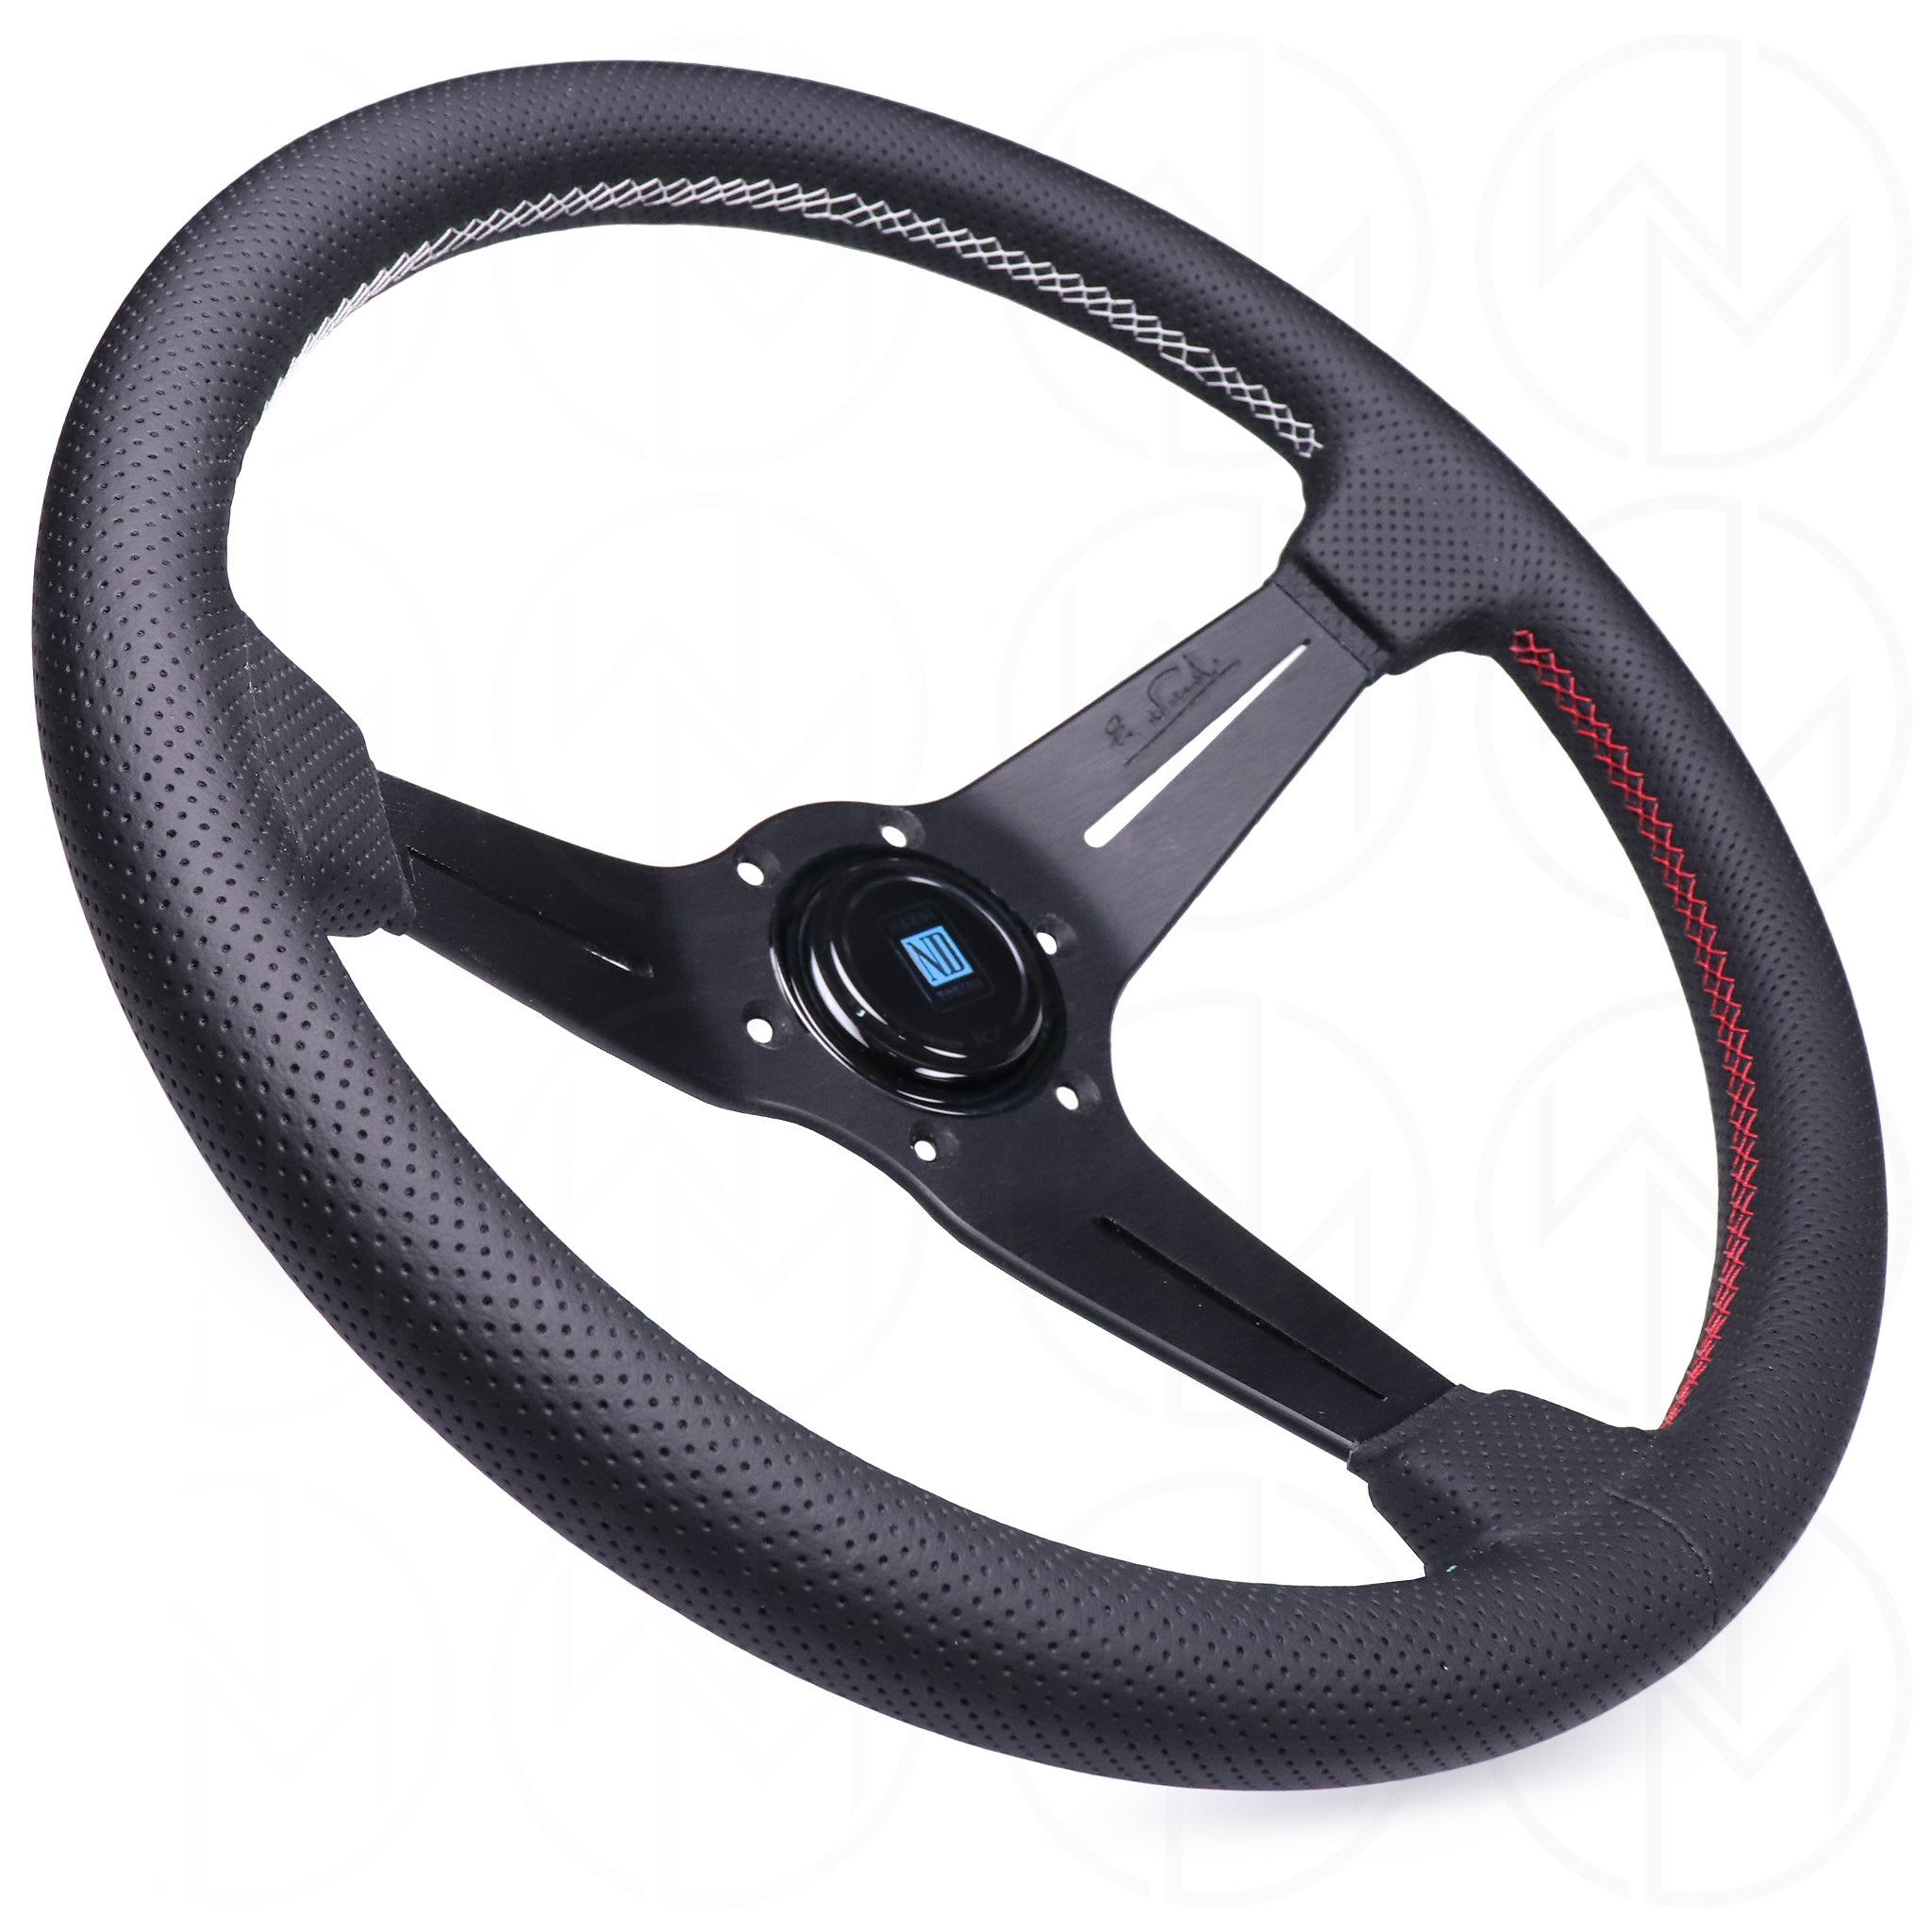 Nardi Sport Rally Deep Corn Sectors Steering Wheel - 350mm Perforated Leather and Colored Sectors